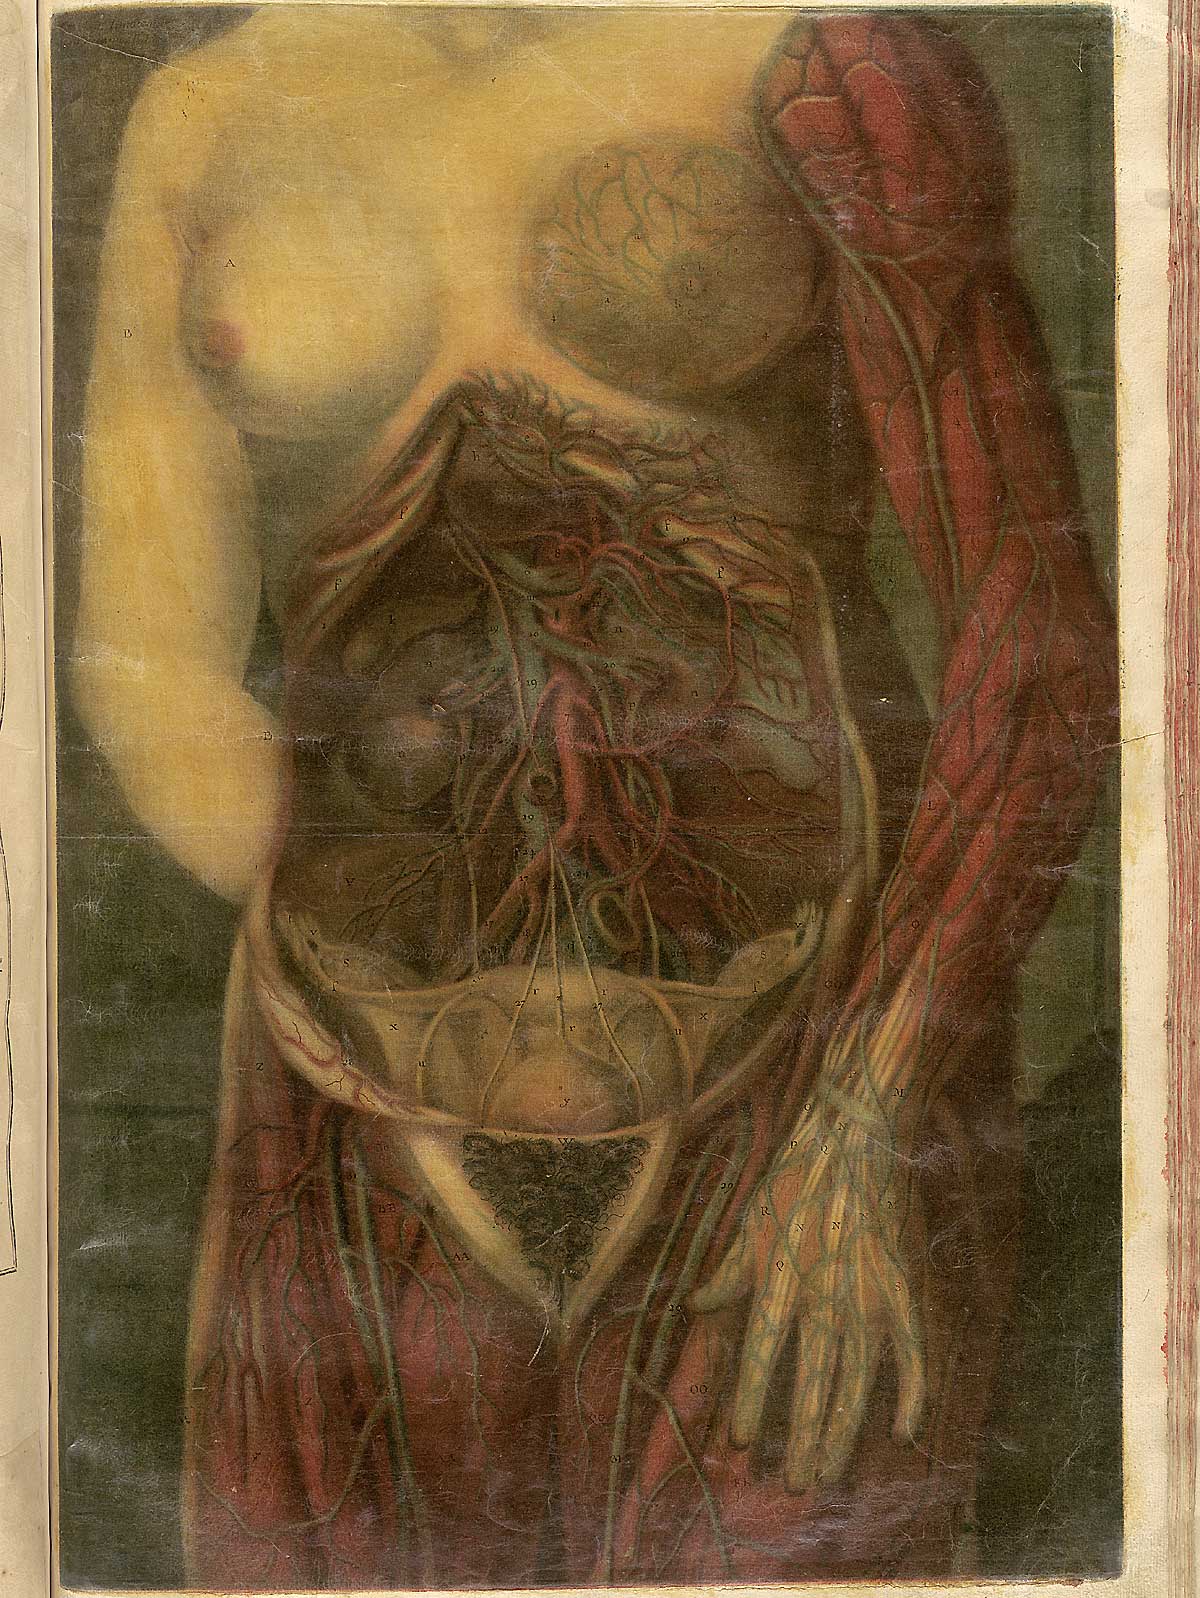 Color mezzotint of the torso, abdomen, and upper legs of a woman with skin and flesh removed from the abdomen to reveal the circulatory system, including that of the reproductive system and the breast; from Jacques Fabian Gautier d’Agoty’s Anatomie générale des viscères en situation, NLM Call no.: WZ 260 G283c 1745.